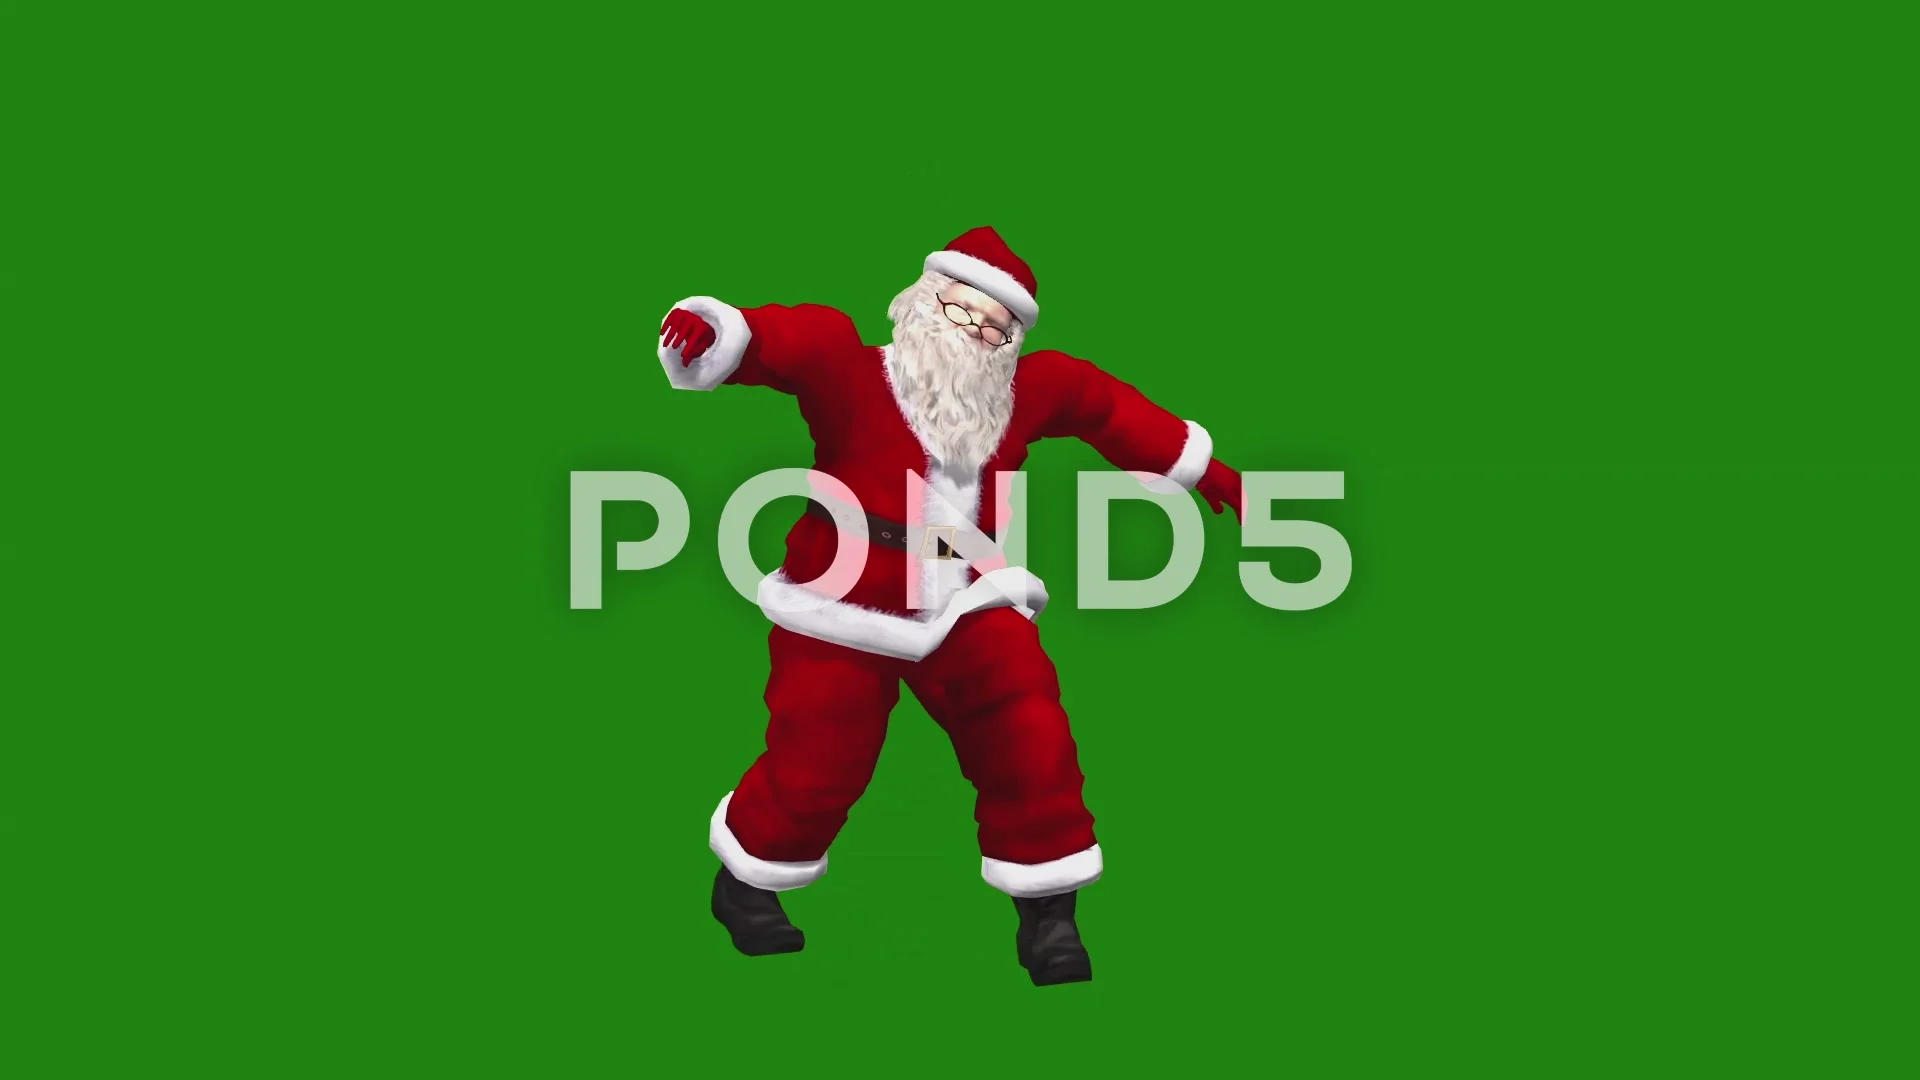 Santa Claus Holiday Hip Hop Dancing on g... | Stock Video | Pond5